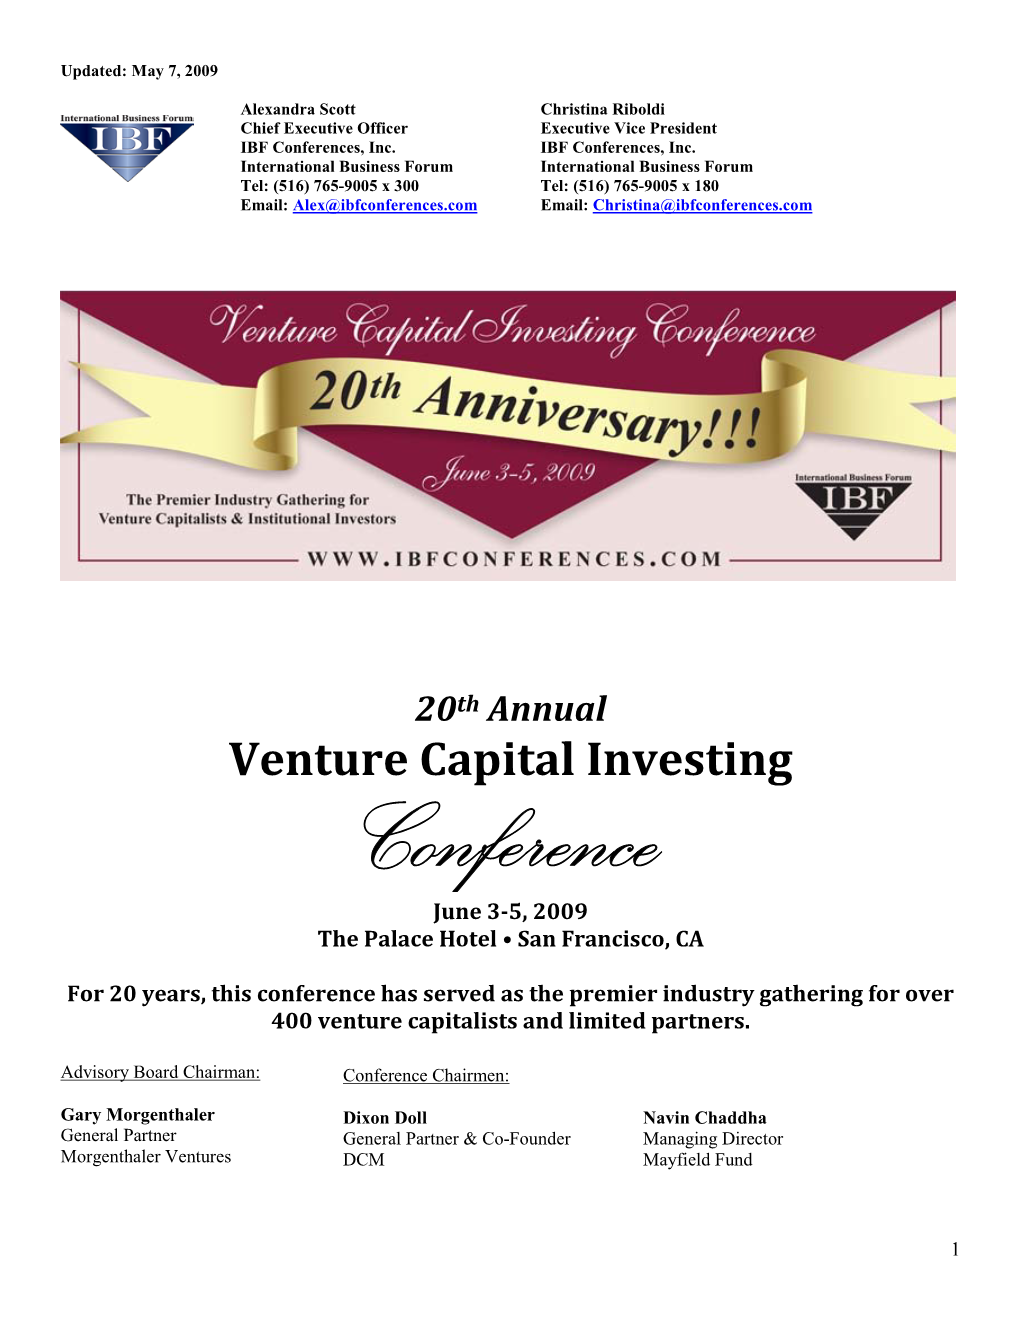 Venture Capital Investing Conference June 3-5, 2009 the Palace Hotel • San Francisco, CA